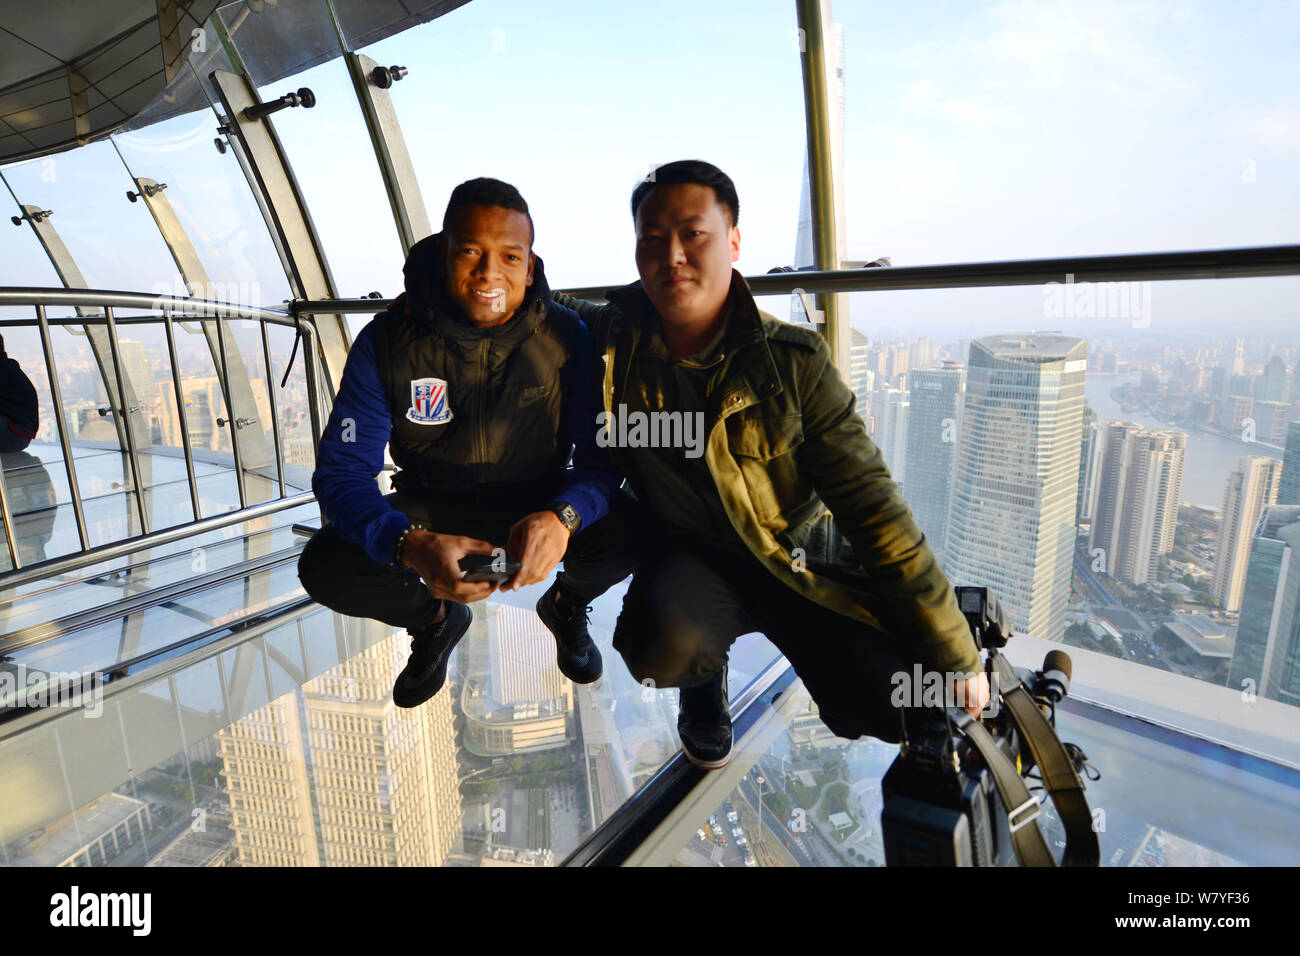 Colombian football player Fredy Guarin of Shanghai Greenland Shenhua F.C., left, attends a ceremony for Shanghai Greenland Shenhua F.C. to prepare for Stock Photo